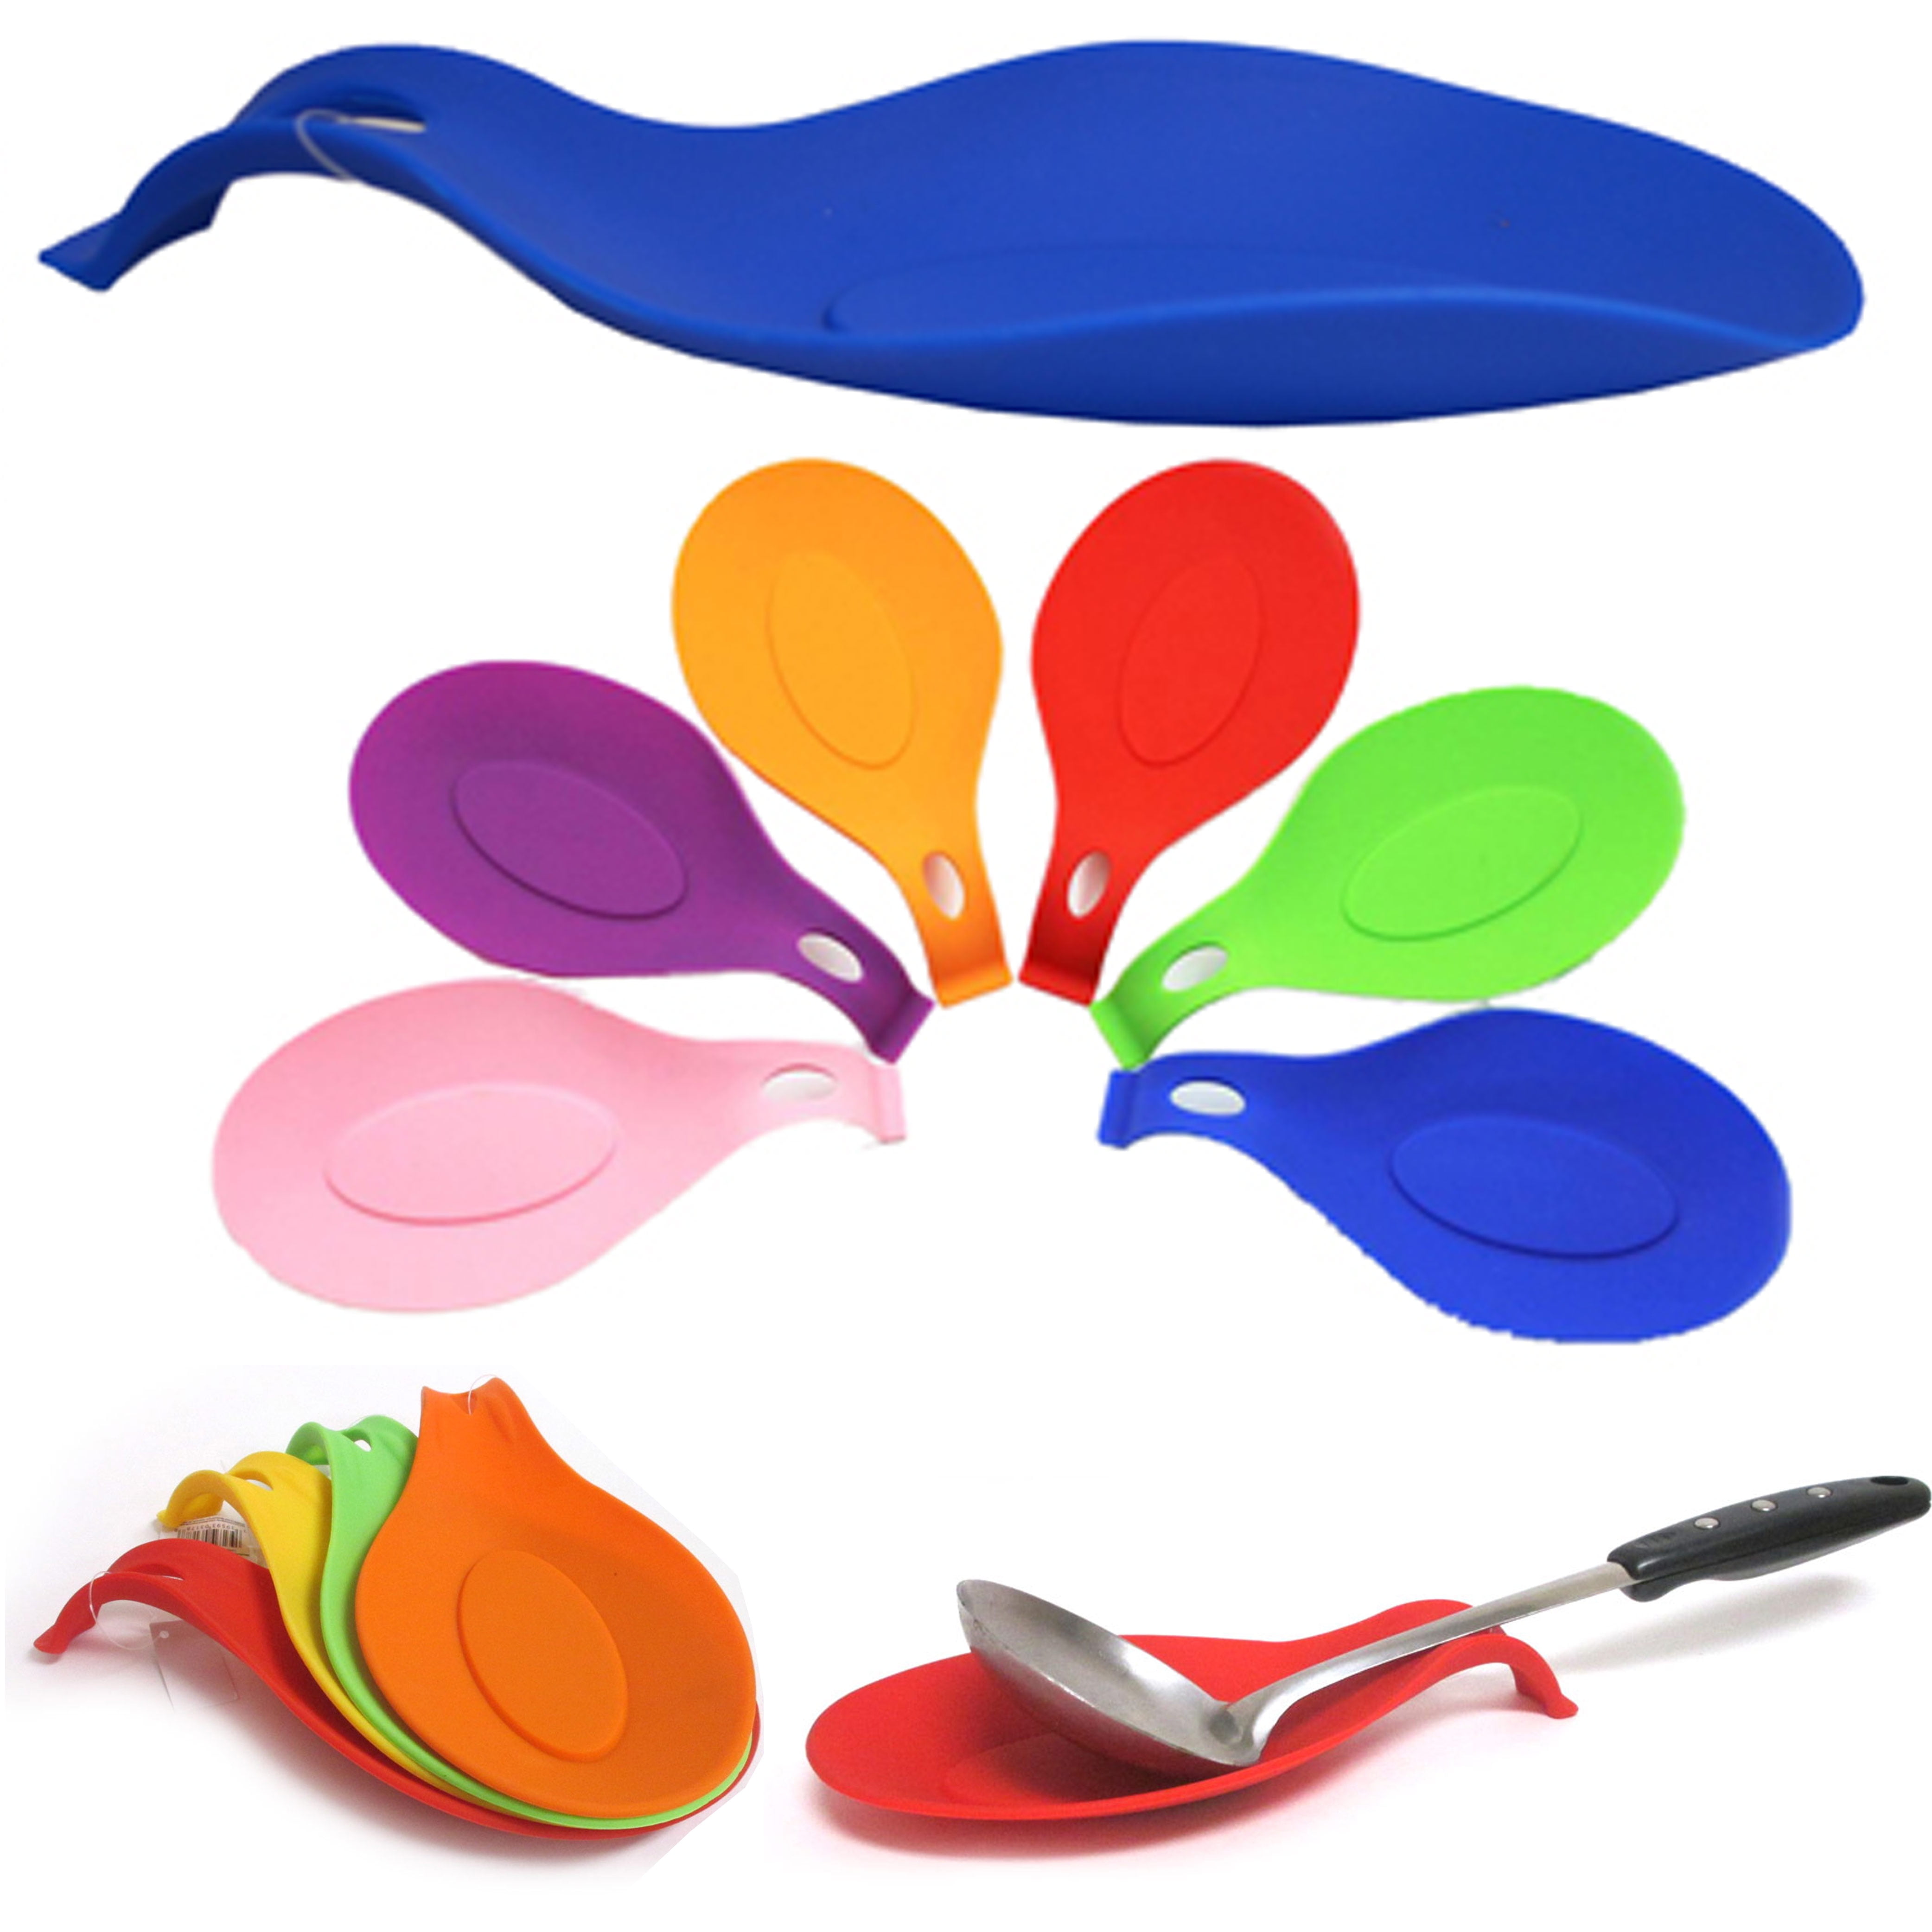 Details about   Spoon Rest Heat Resistant Kitchen Utensil Rest Holder Cooking Silicone Rack 